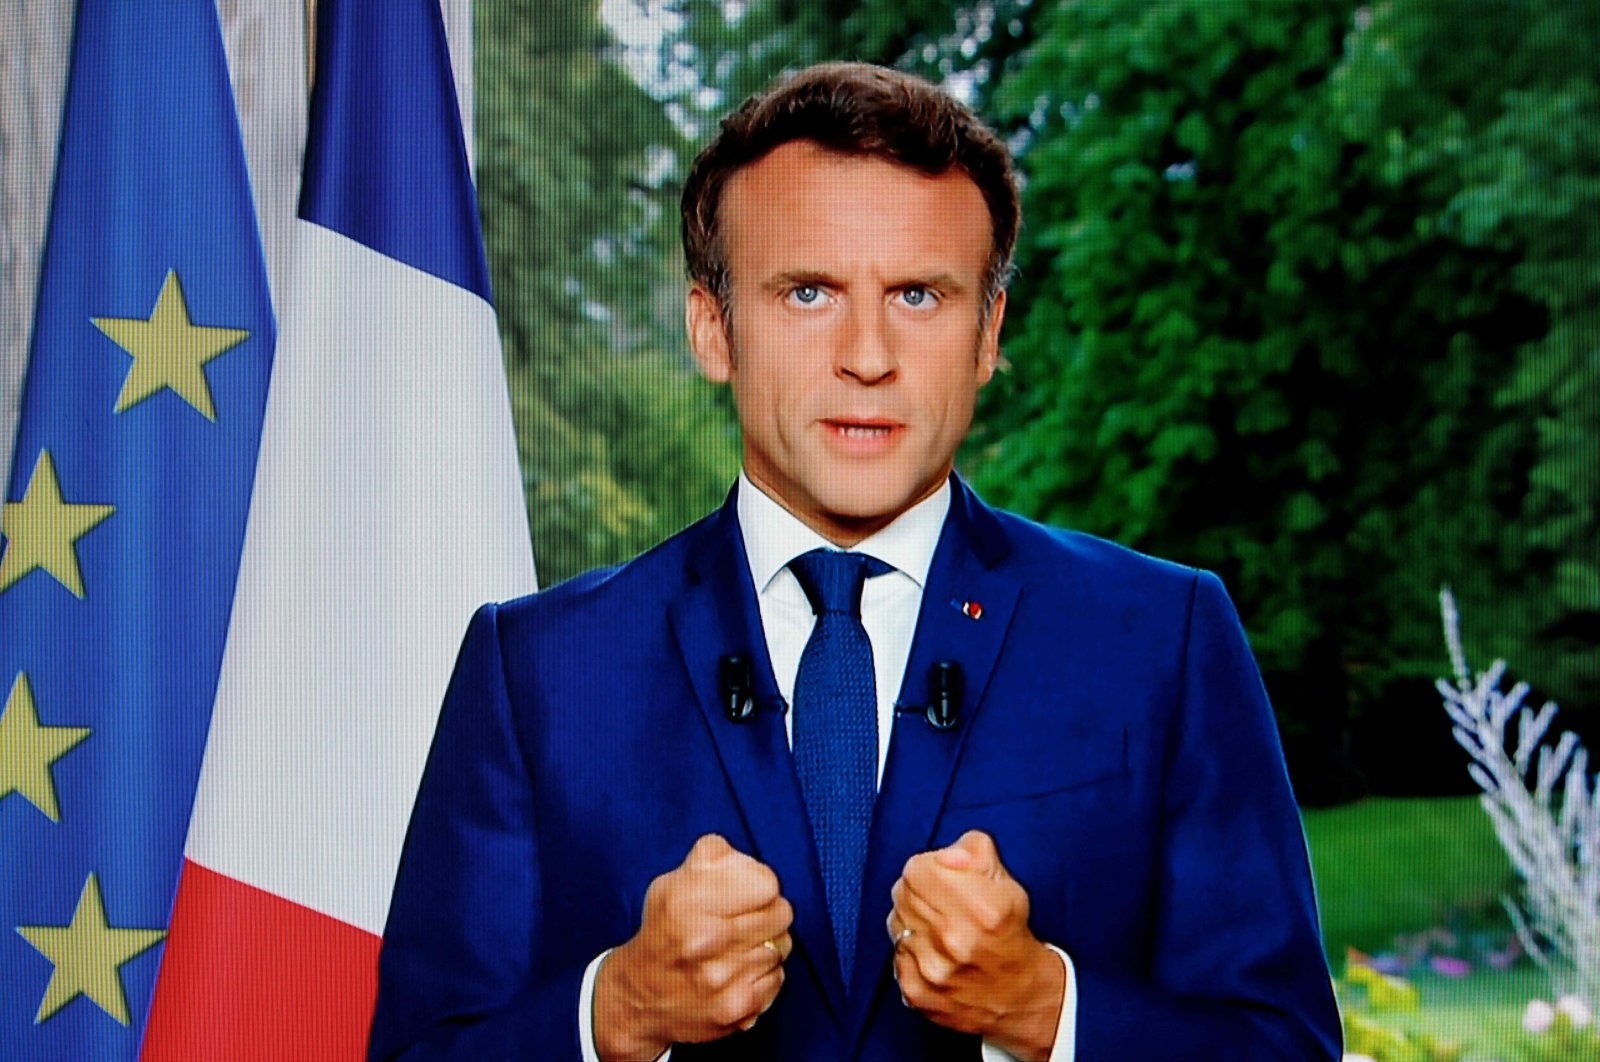 A photo of a TV screen shows French President Emmanuel Macron speaking during televised address in Paris, France, June 22, 2022. (AFP Photo)